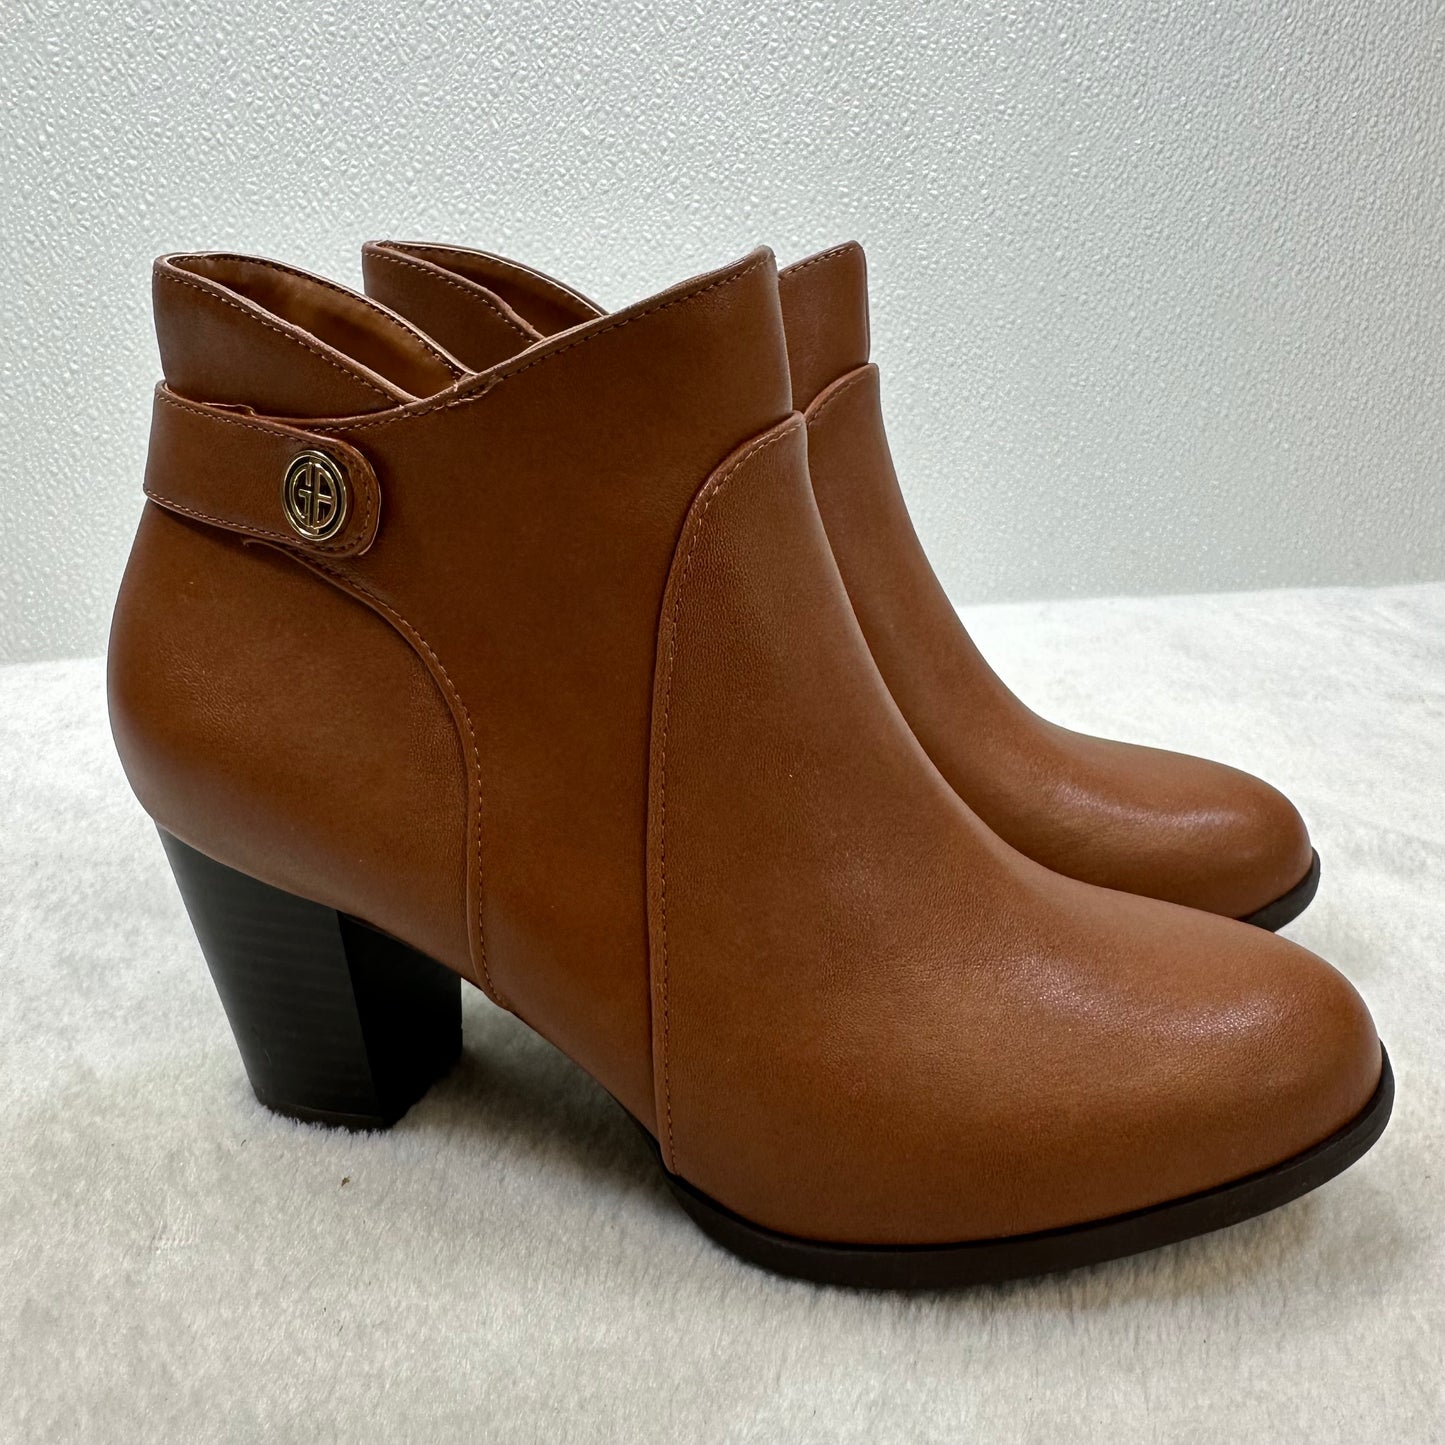 Boots Ankle Heels By Giani Bernini  Size: 6.5